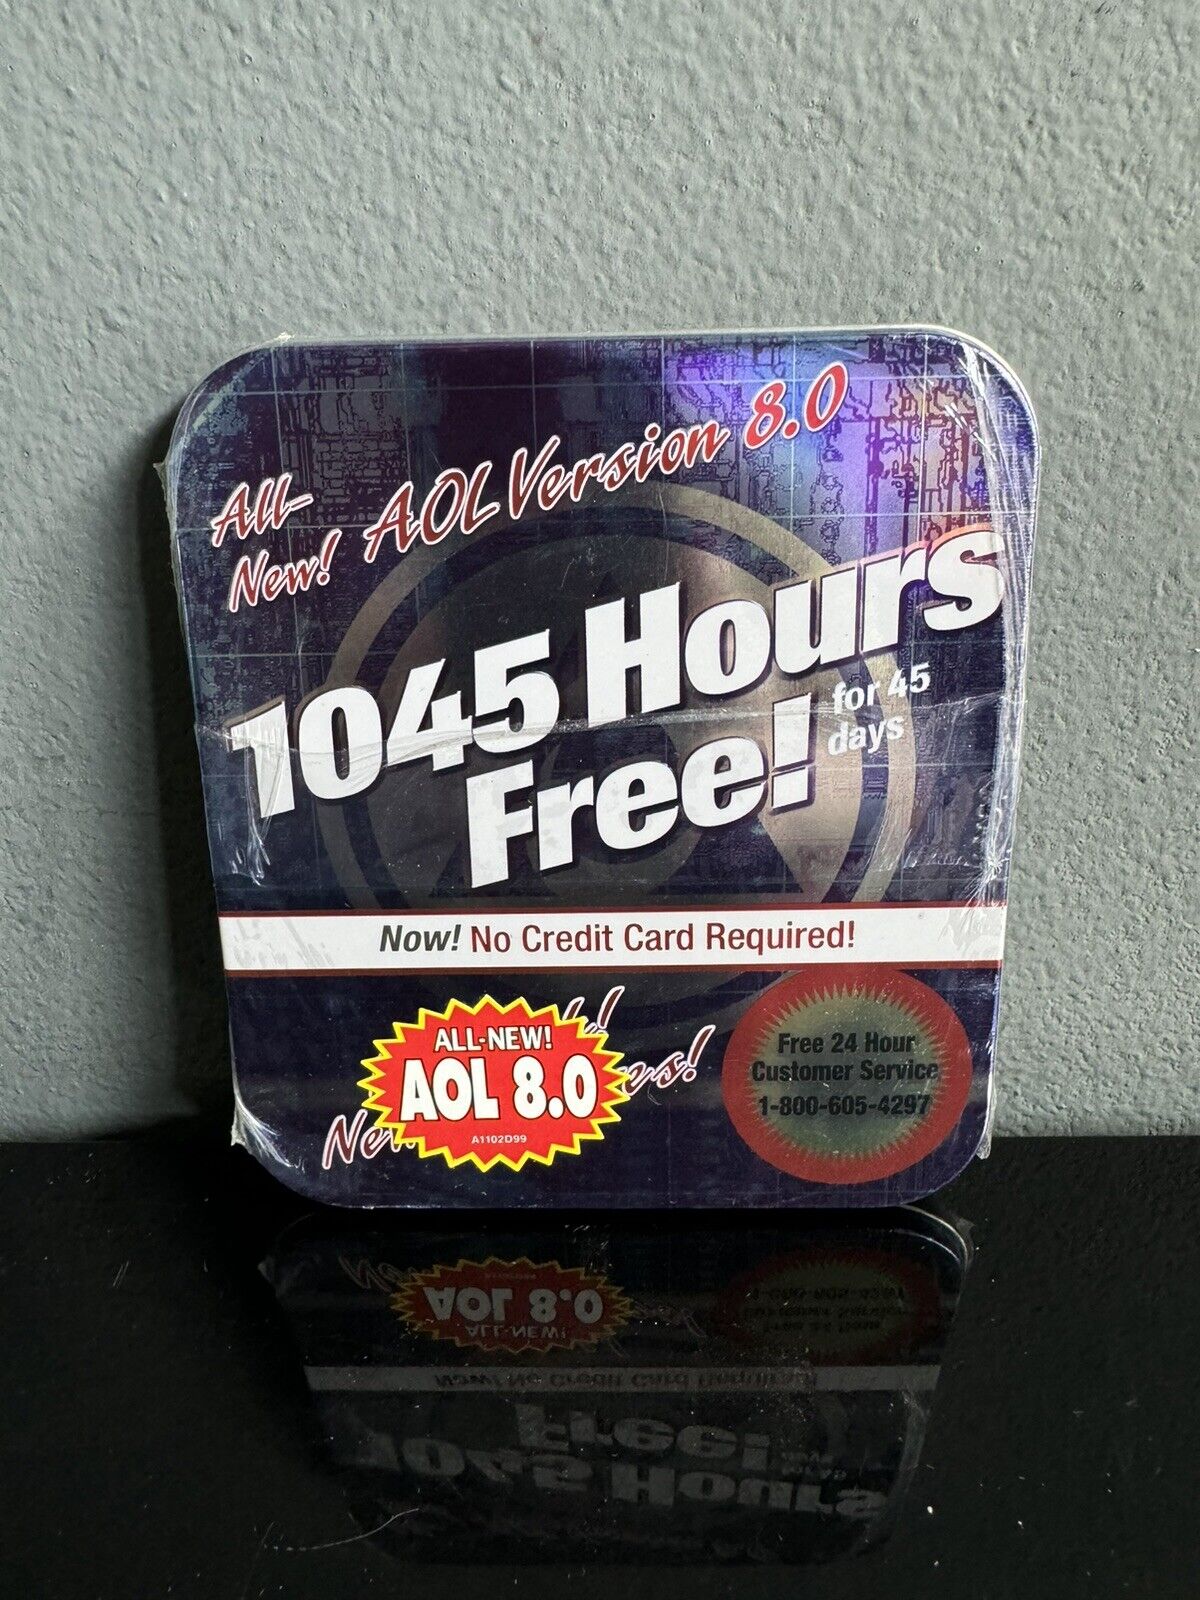 America Online AOL Installation 8.0 CD In Case 1045 Hours Free - Collectible NEW